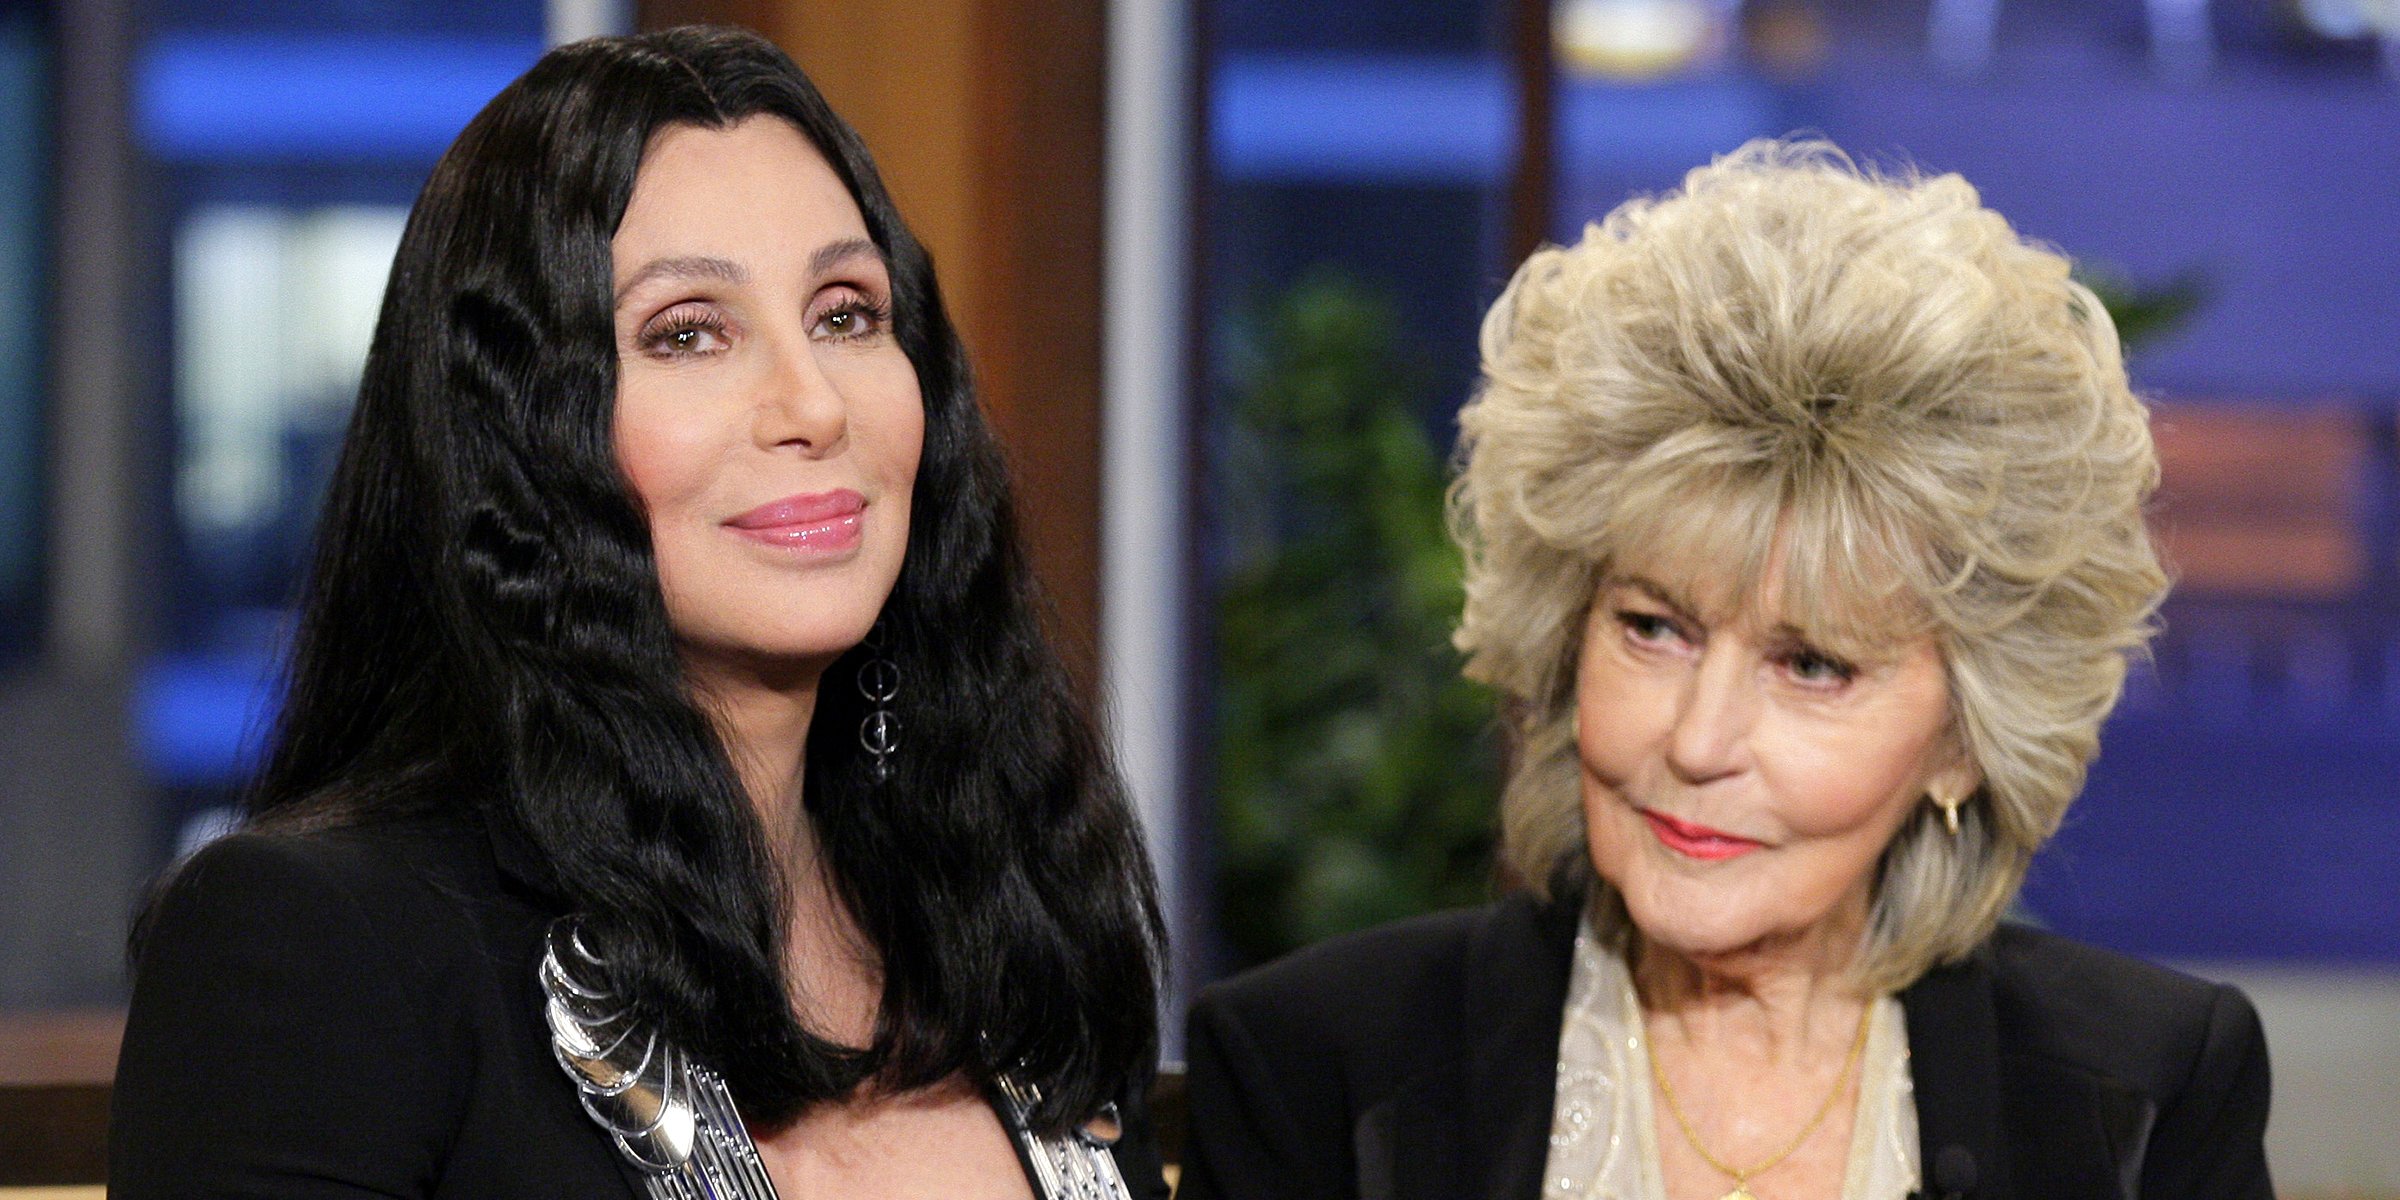 Cher and her mother Georgia Holt. | Source: Getty Images